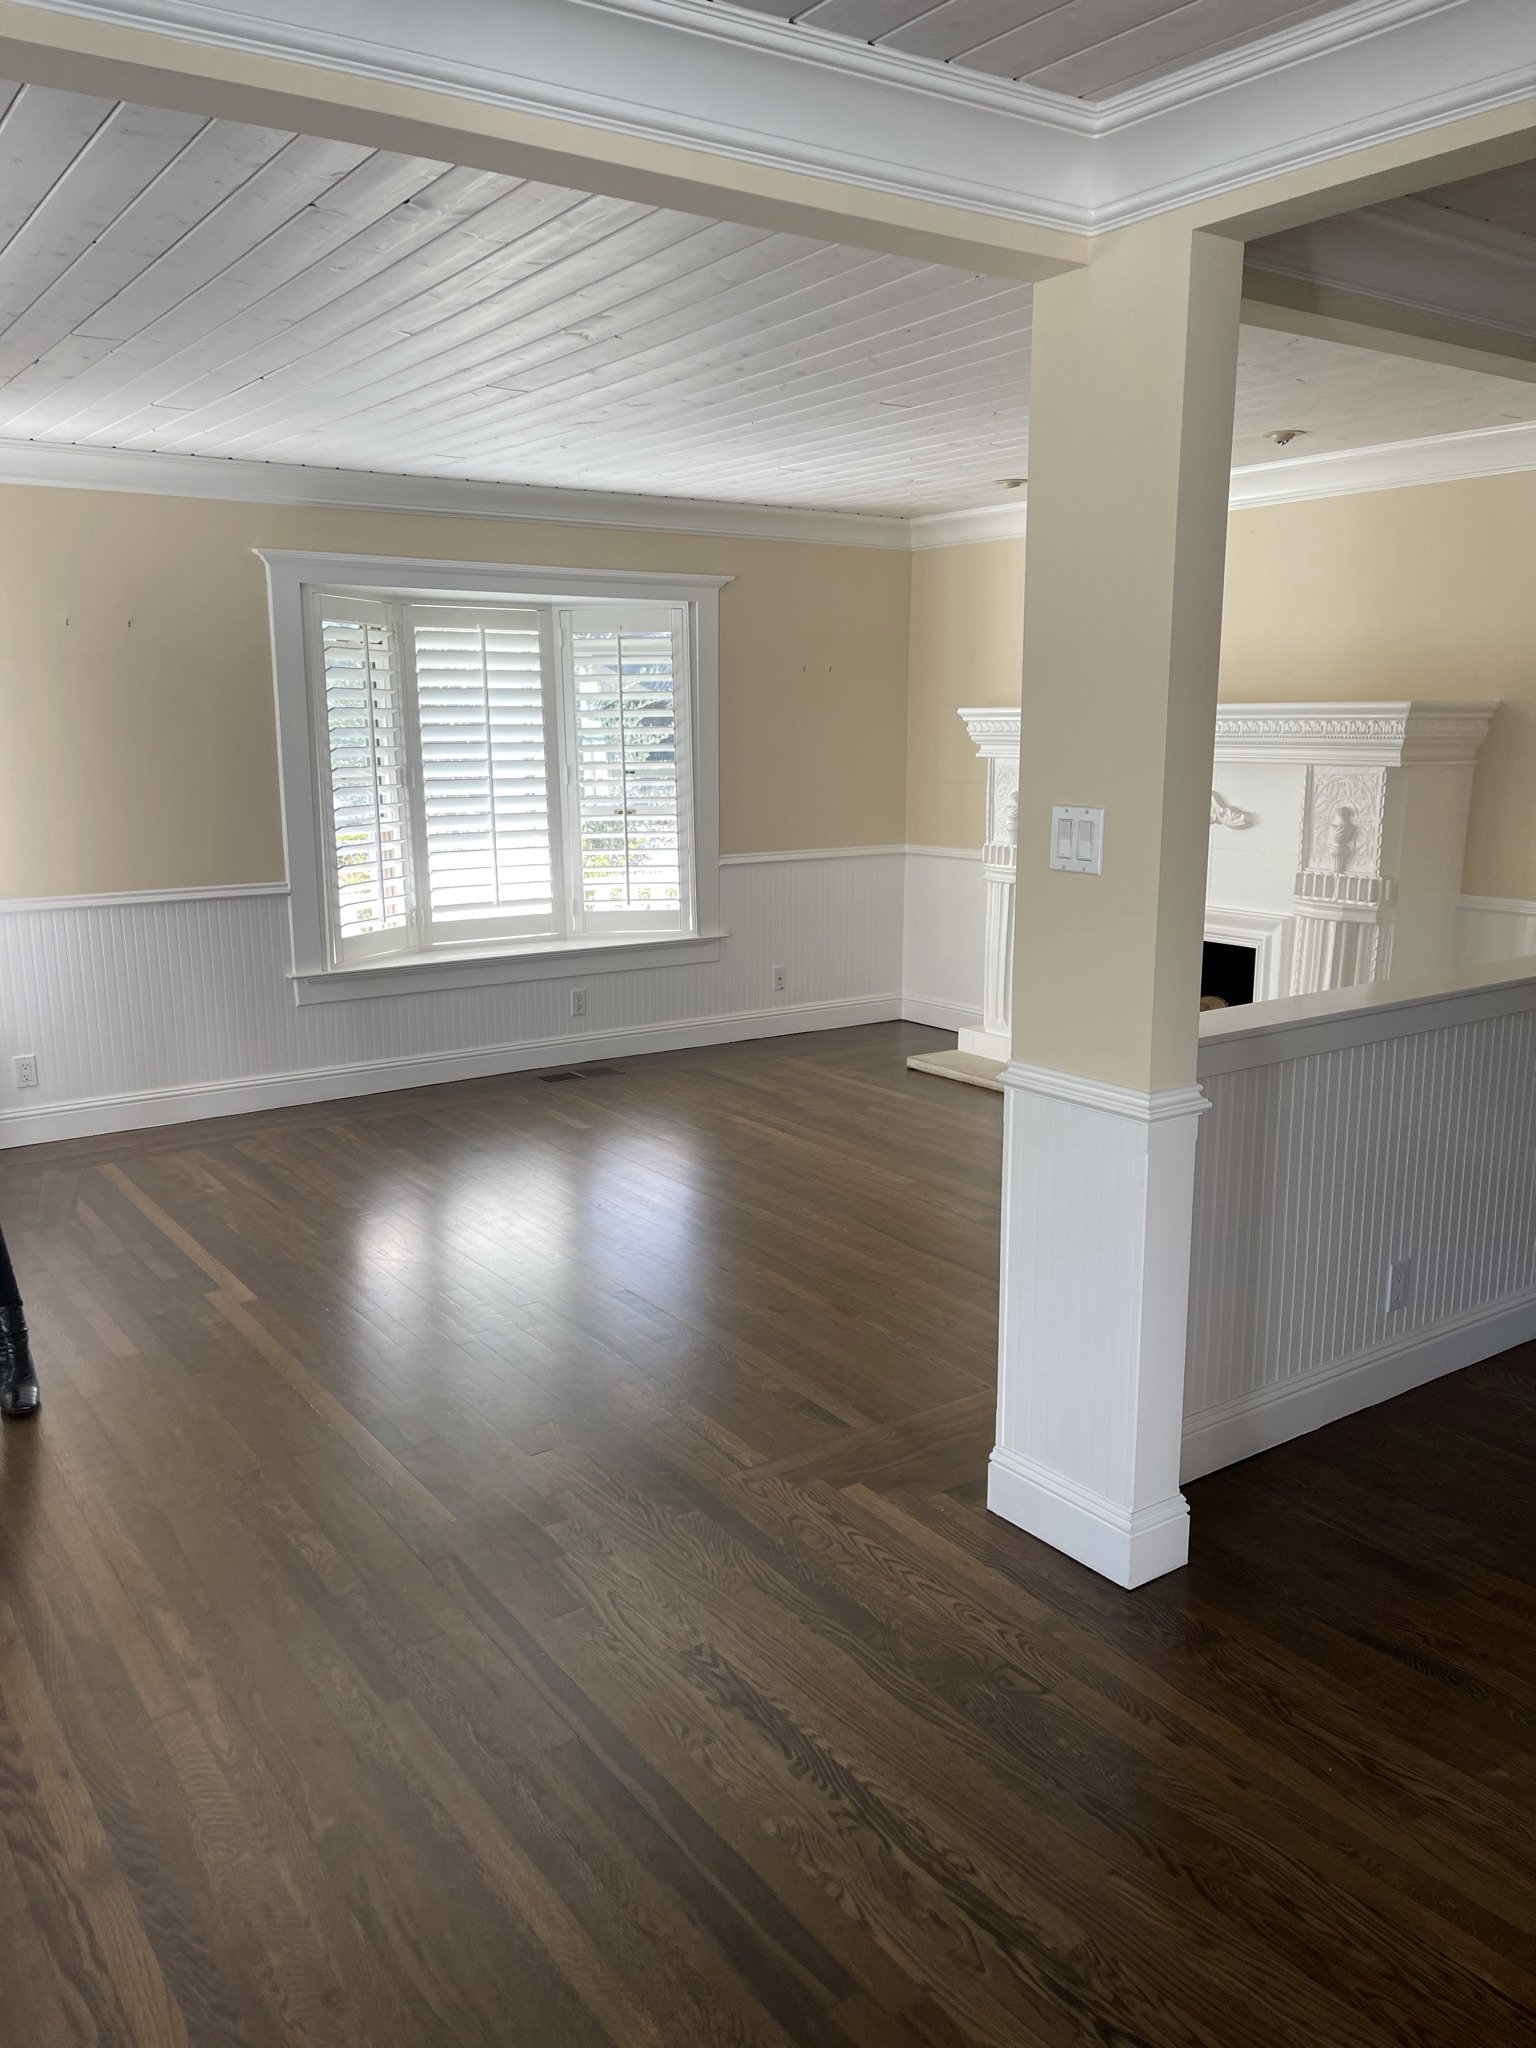  Before image of a low ceilinged living space with wood floors, pale yellow walls, and painted white ceilings. There is a column and half wall separating the space and a large white fireplace along one wall.  